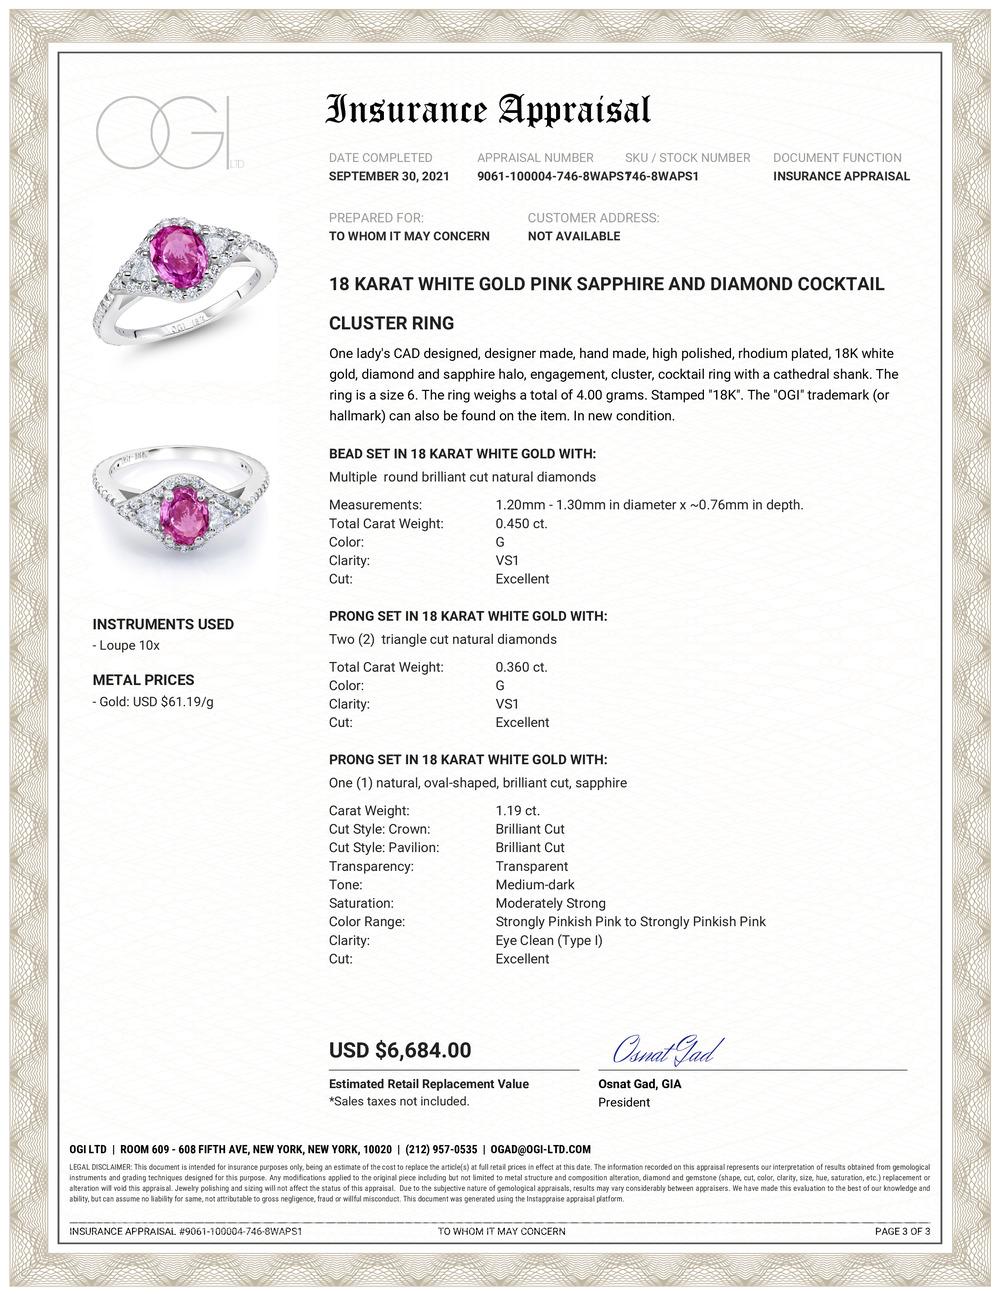 Eighteen karats white gold ring
Ceylon pink sapphire weighing 1.19 carat
Match pair of trillion diamond weighing 0.36 carat
Pave-set diamonds weighing 0.45 carat  
One of a kind ring 
New Ring
Ring Size 6
The ring can be resized 
Handmade in the USA
